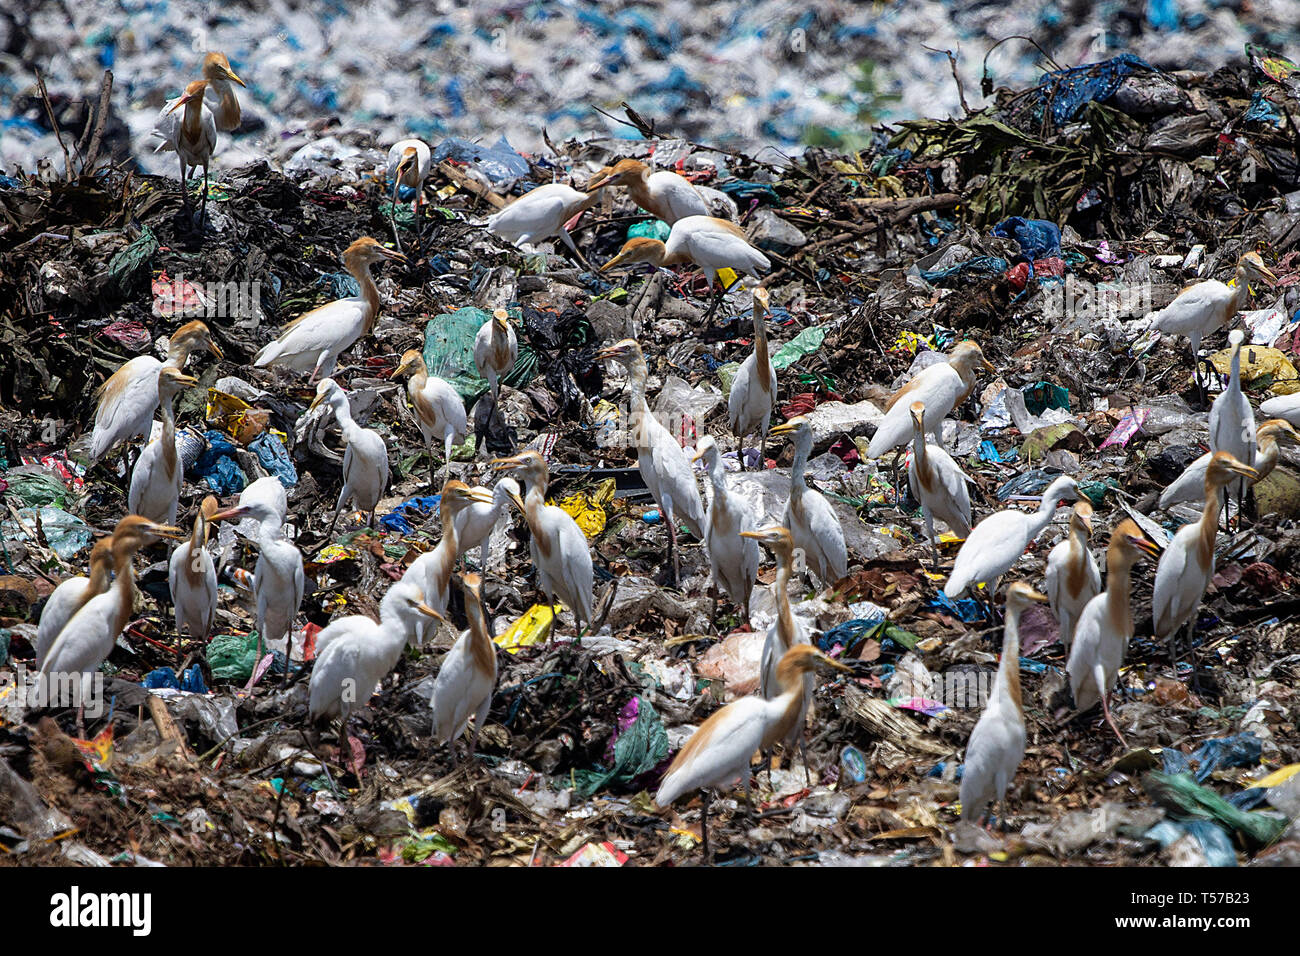 Herons seen feeding at a garbage dump site in Lhokseumawe, Aceh province,  Indonesia. Based on a study by McKinsey and Co. and Ocean Conservancy,  Indonesia is the number two plastic waste producing